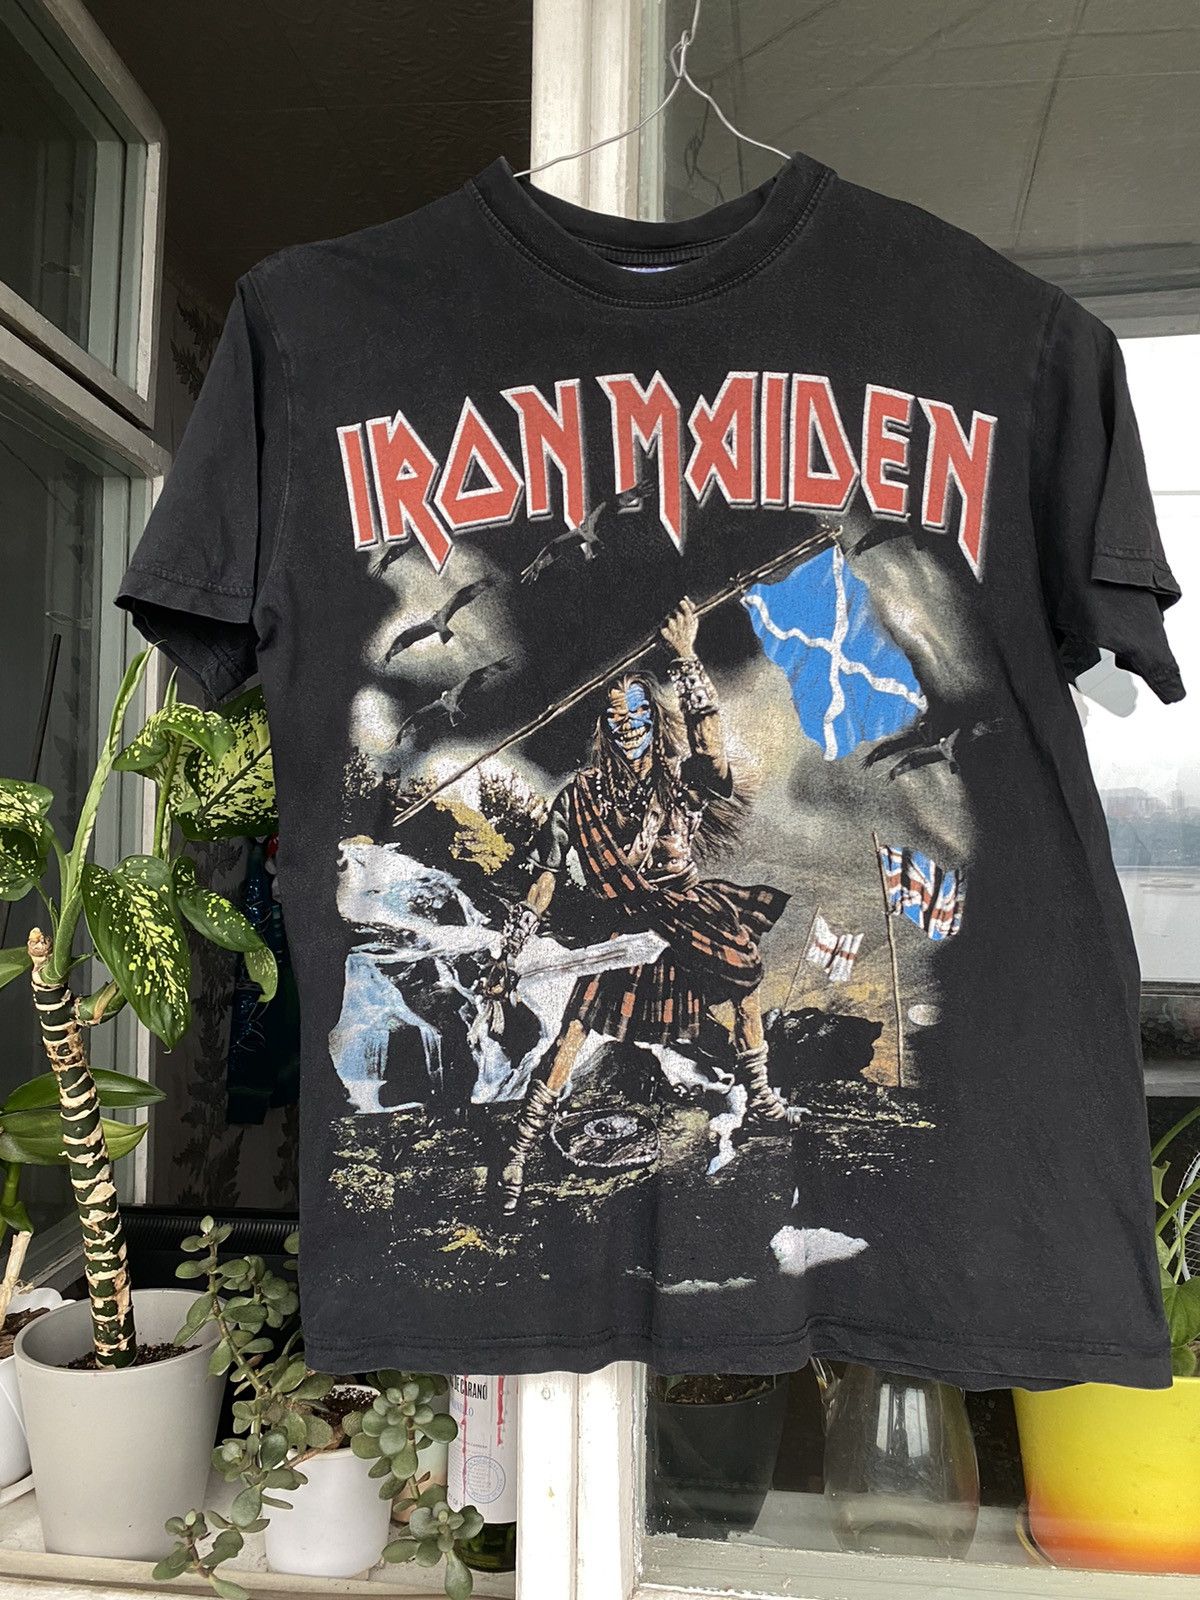 Vintage Vintage Iron Maiden T-shirt all over |